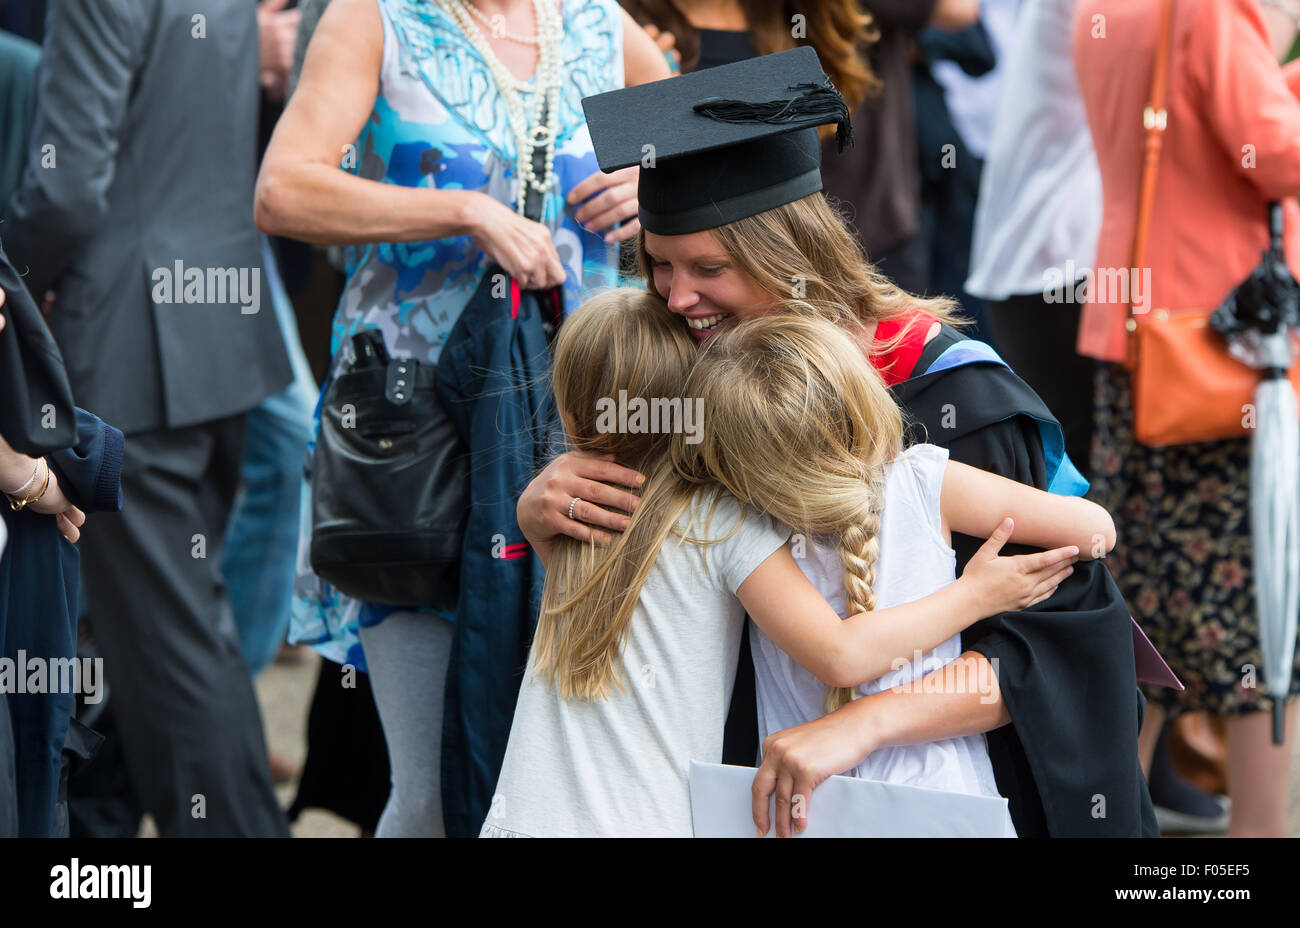 A student mum from Brighton celebrates graduating near the Brighton Pavilion with family and friends. Stock Photo